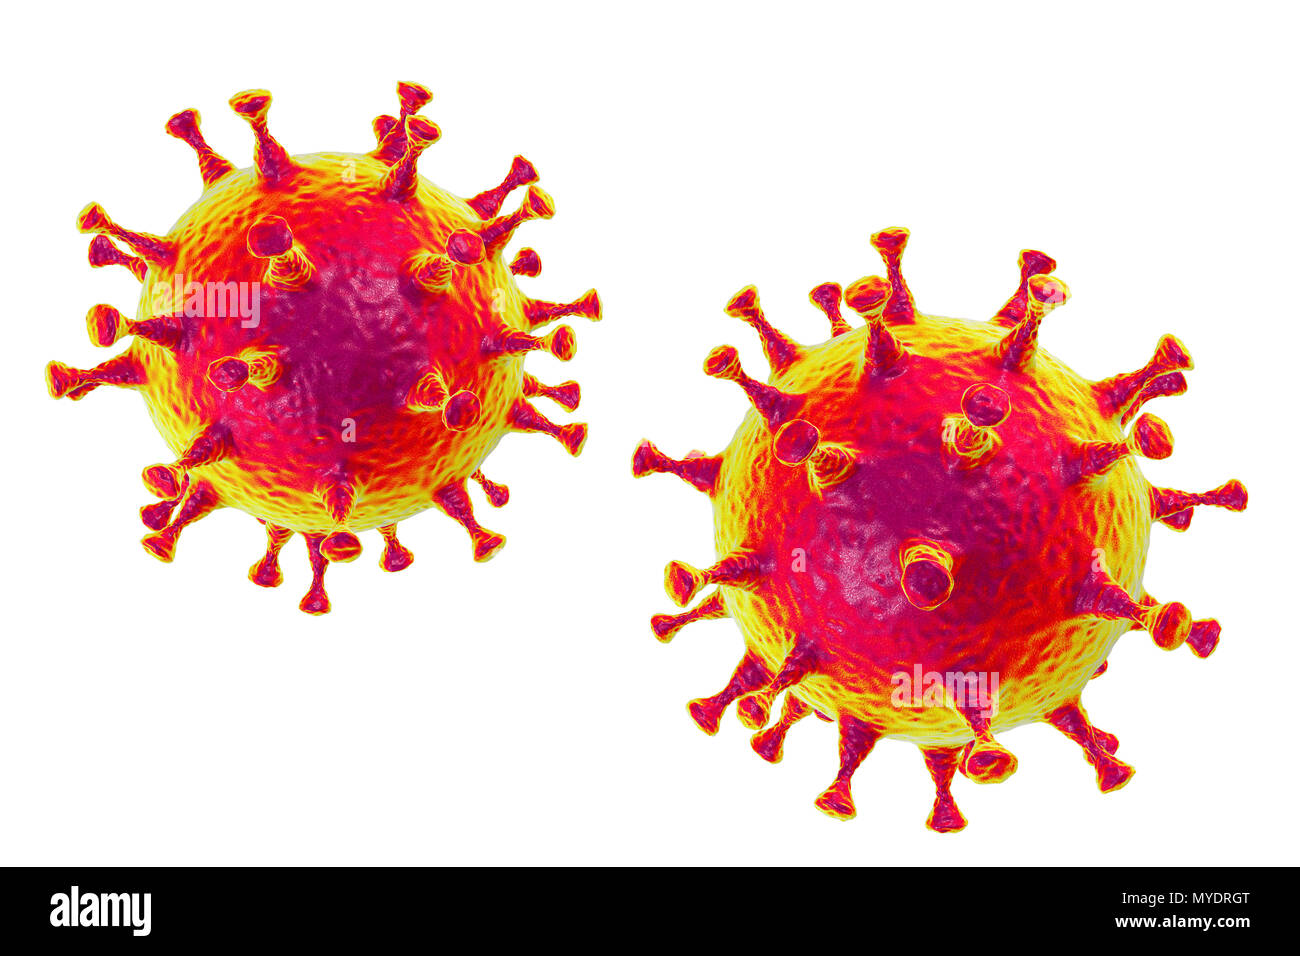 Middle East Respiratory Syndrome Coronavirus (MERS-CoV) particles (virions), computer illustration. Formerly known as novel coronavirus, MERS was first identified in Saudi Arabia in 2012. Most people infected with MERS develop severe acute respiratory illness with symptoms of fever, cough, and shortness of breath. Stock Photo